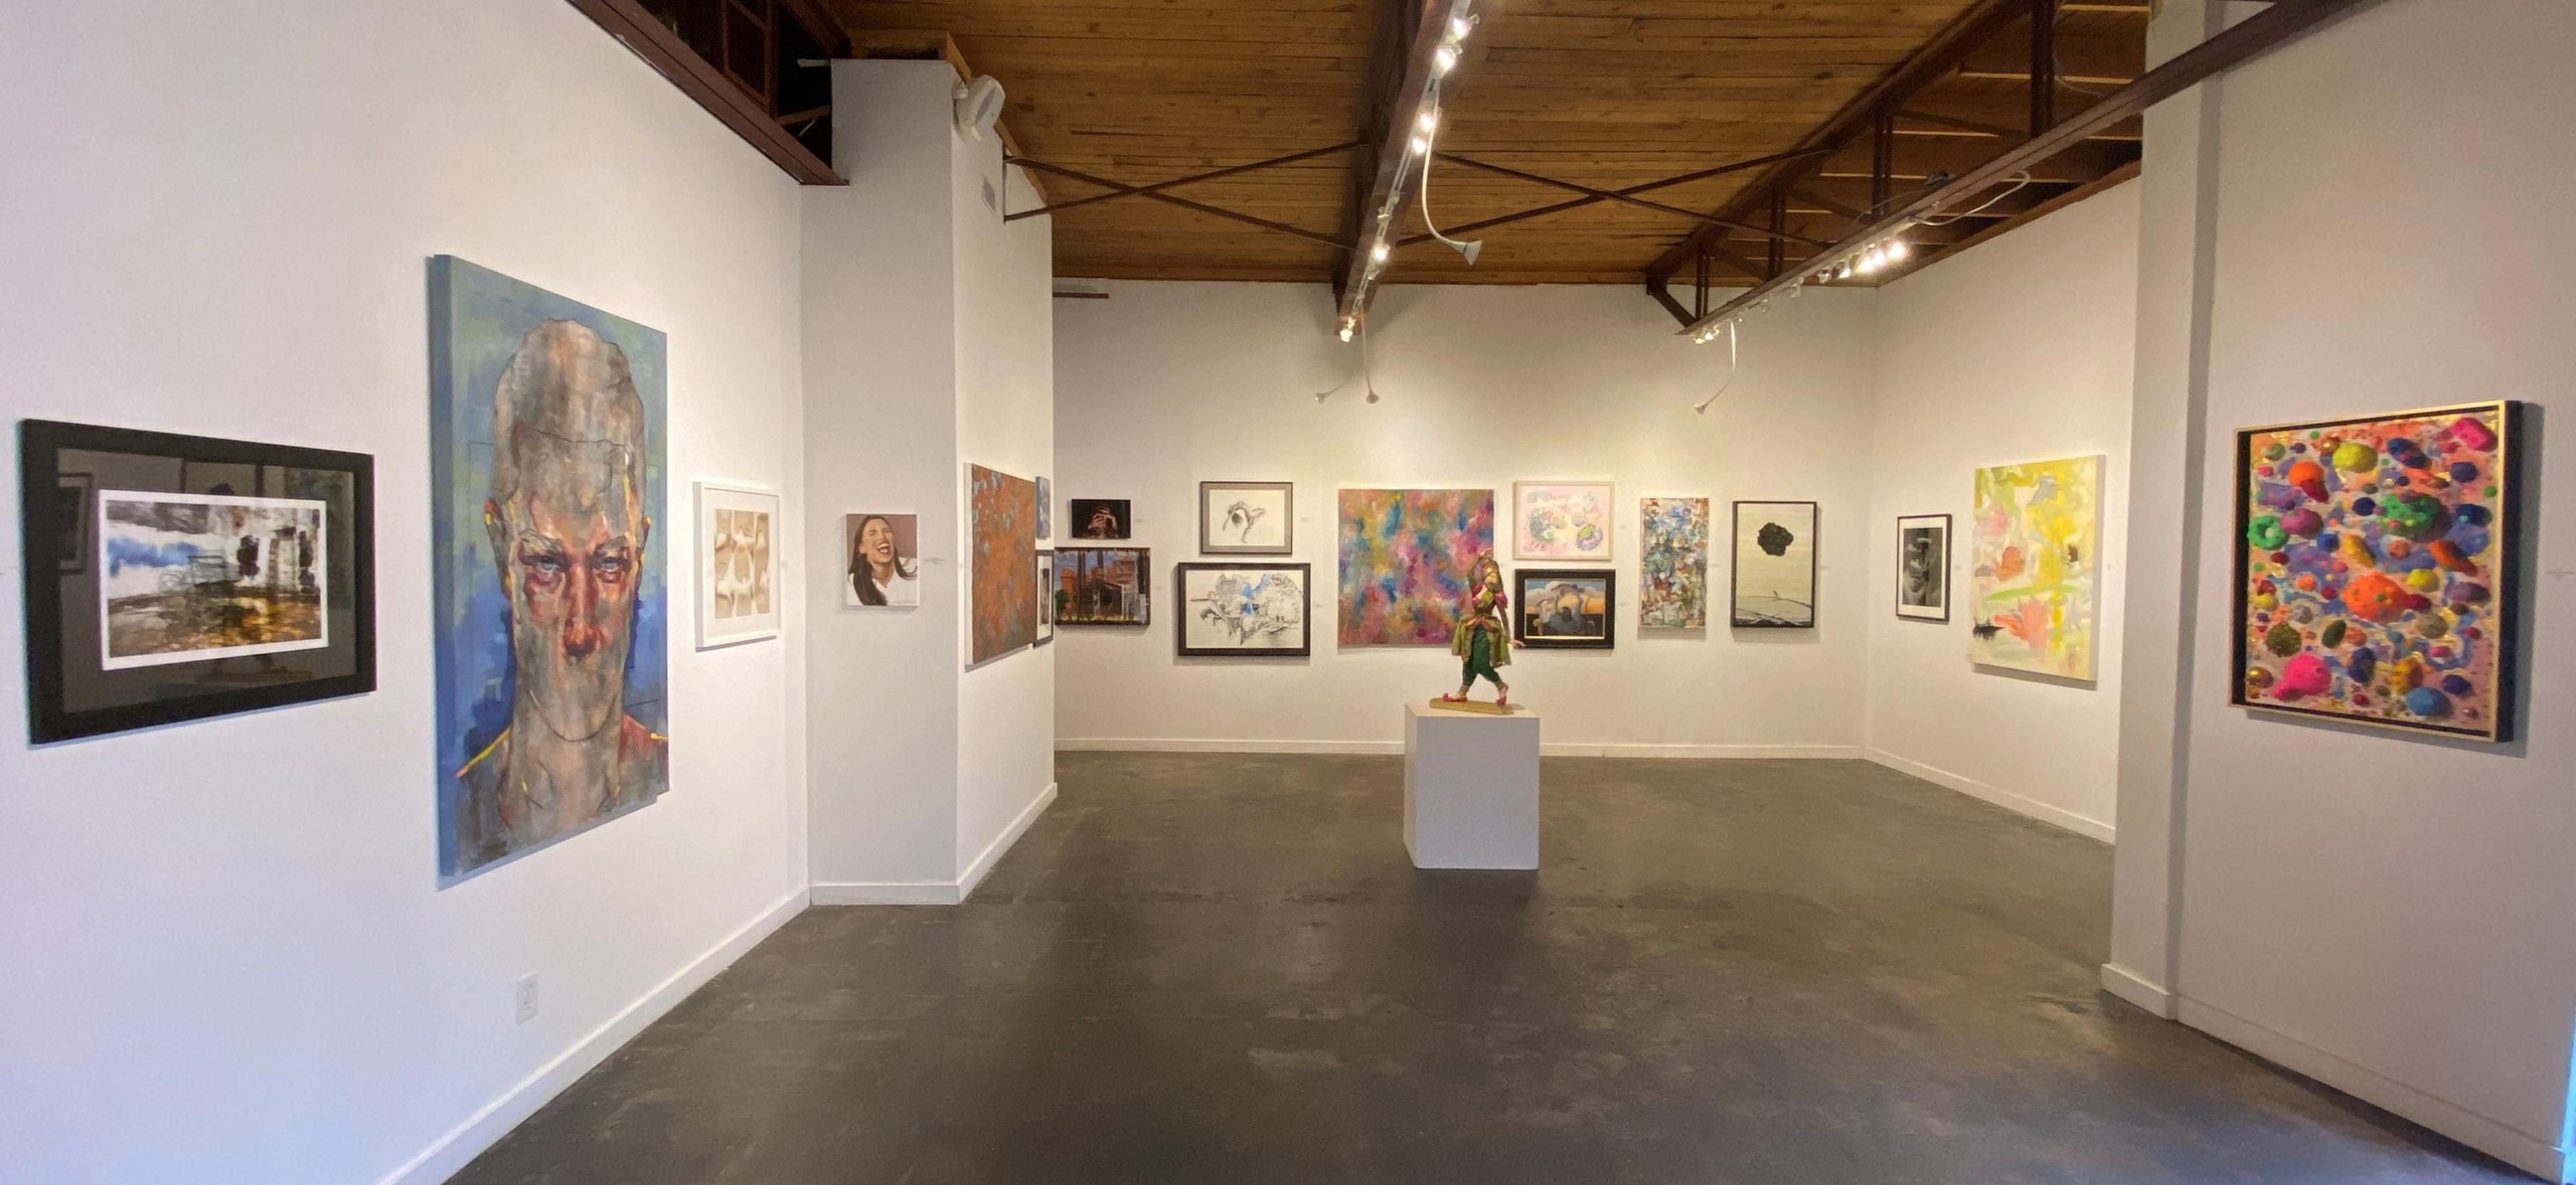 Archway Gallery